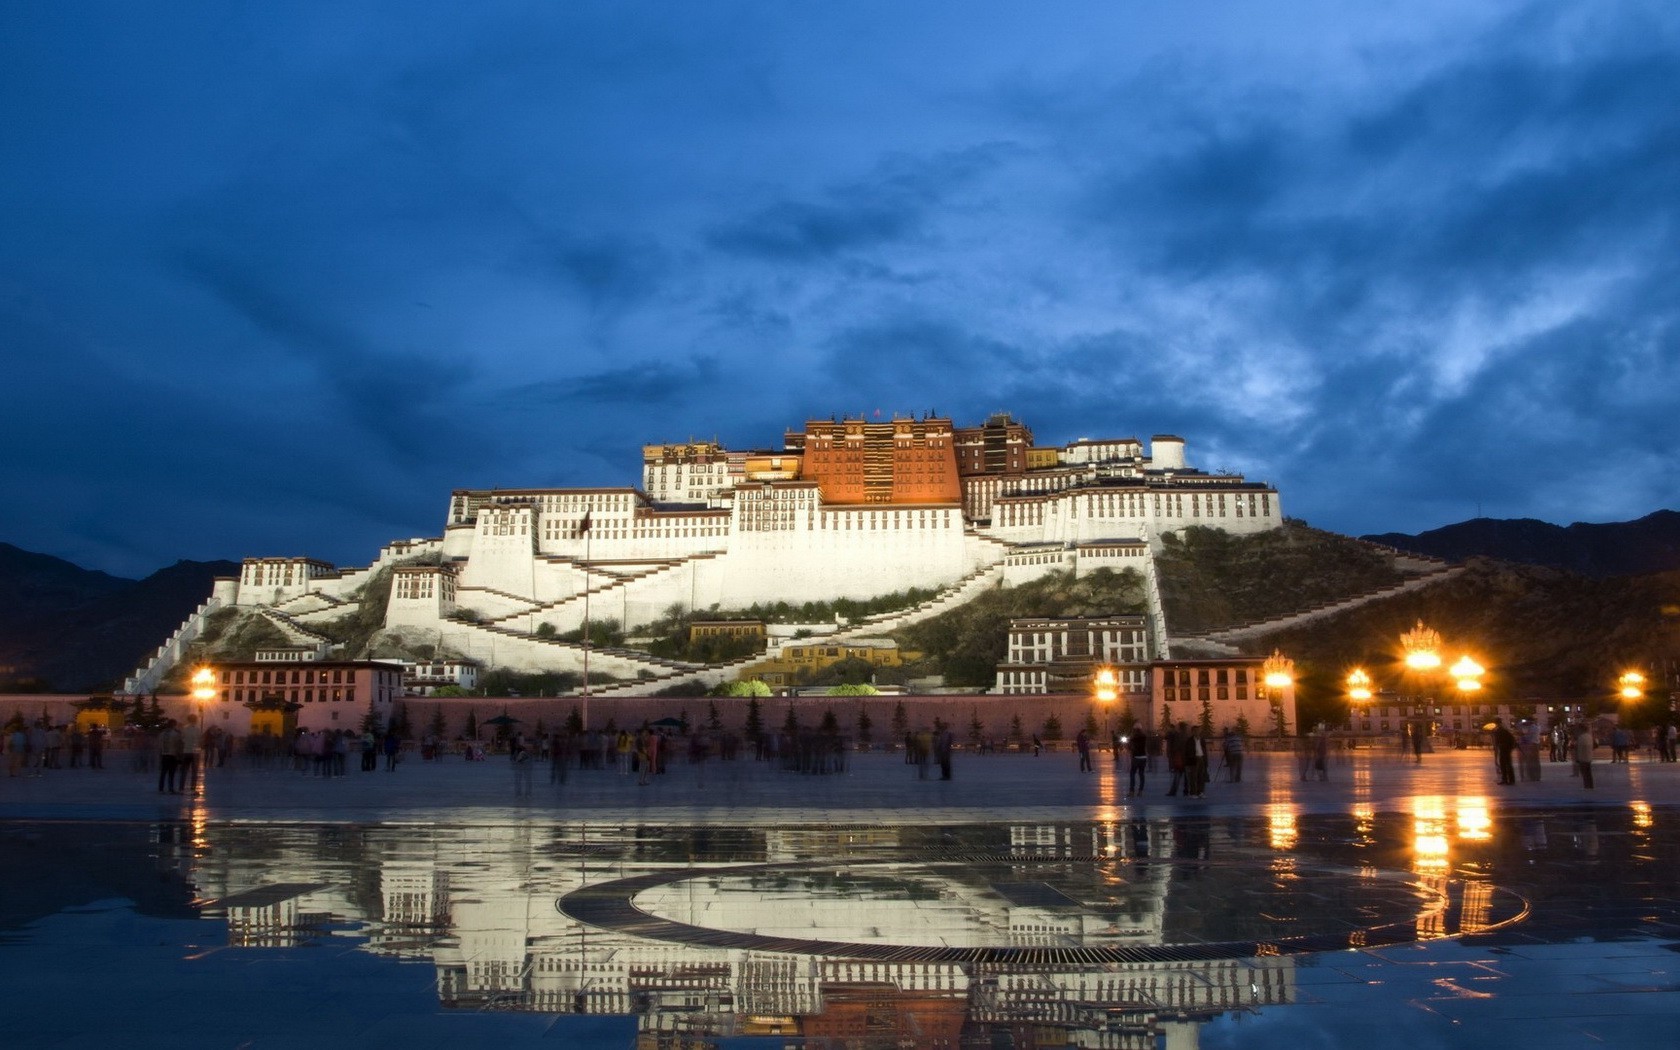 Buddhism, Architecture, Tibet, Potala Palace, Palace, Evening, Hill, Stairs, Clouds, Lights, Rock, Town square, Reflection, Water, Tourism, Mountain, Lhasa Wallpaper